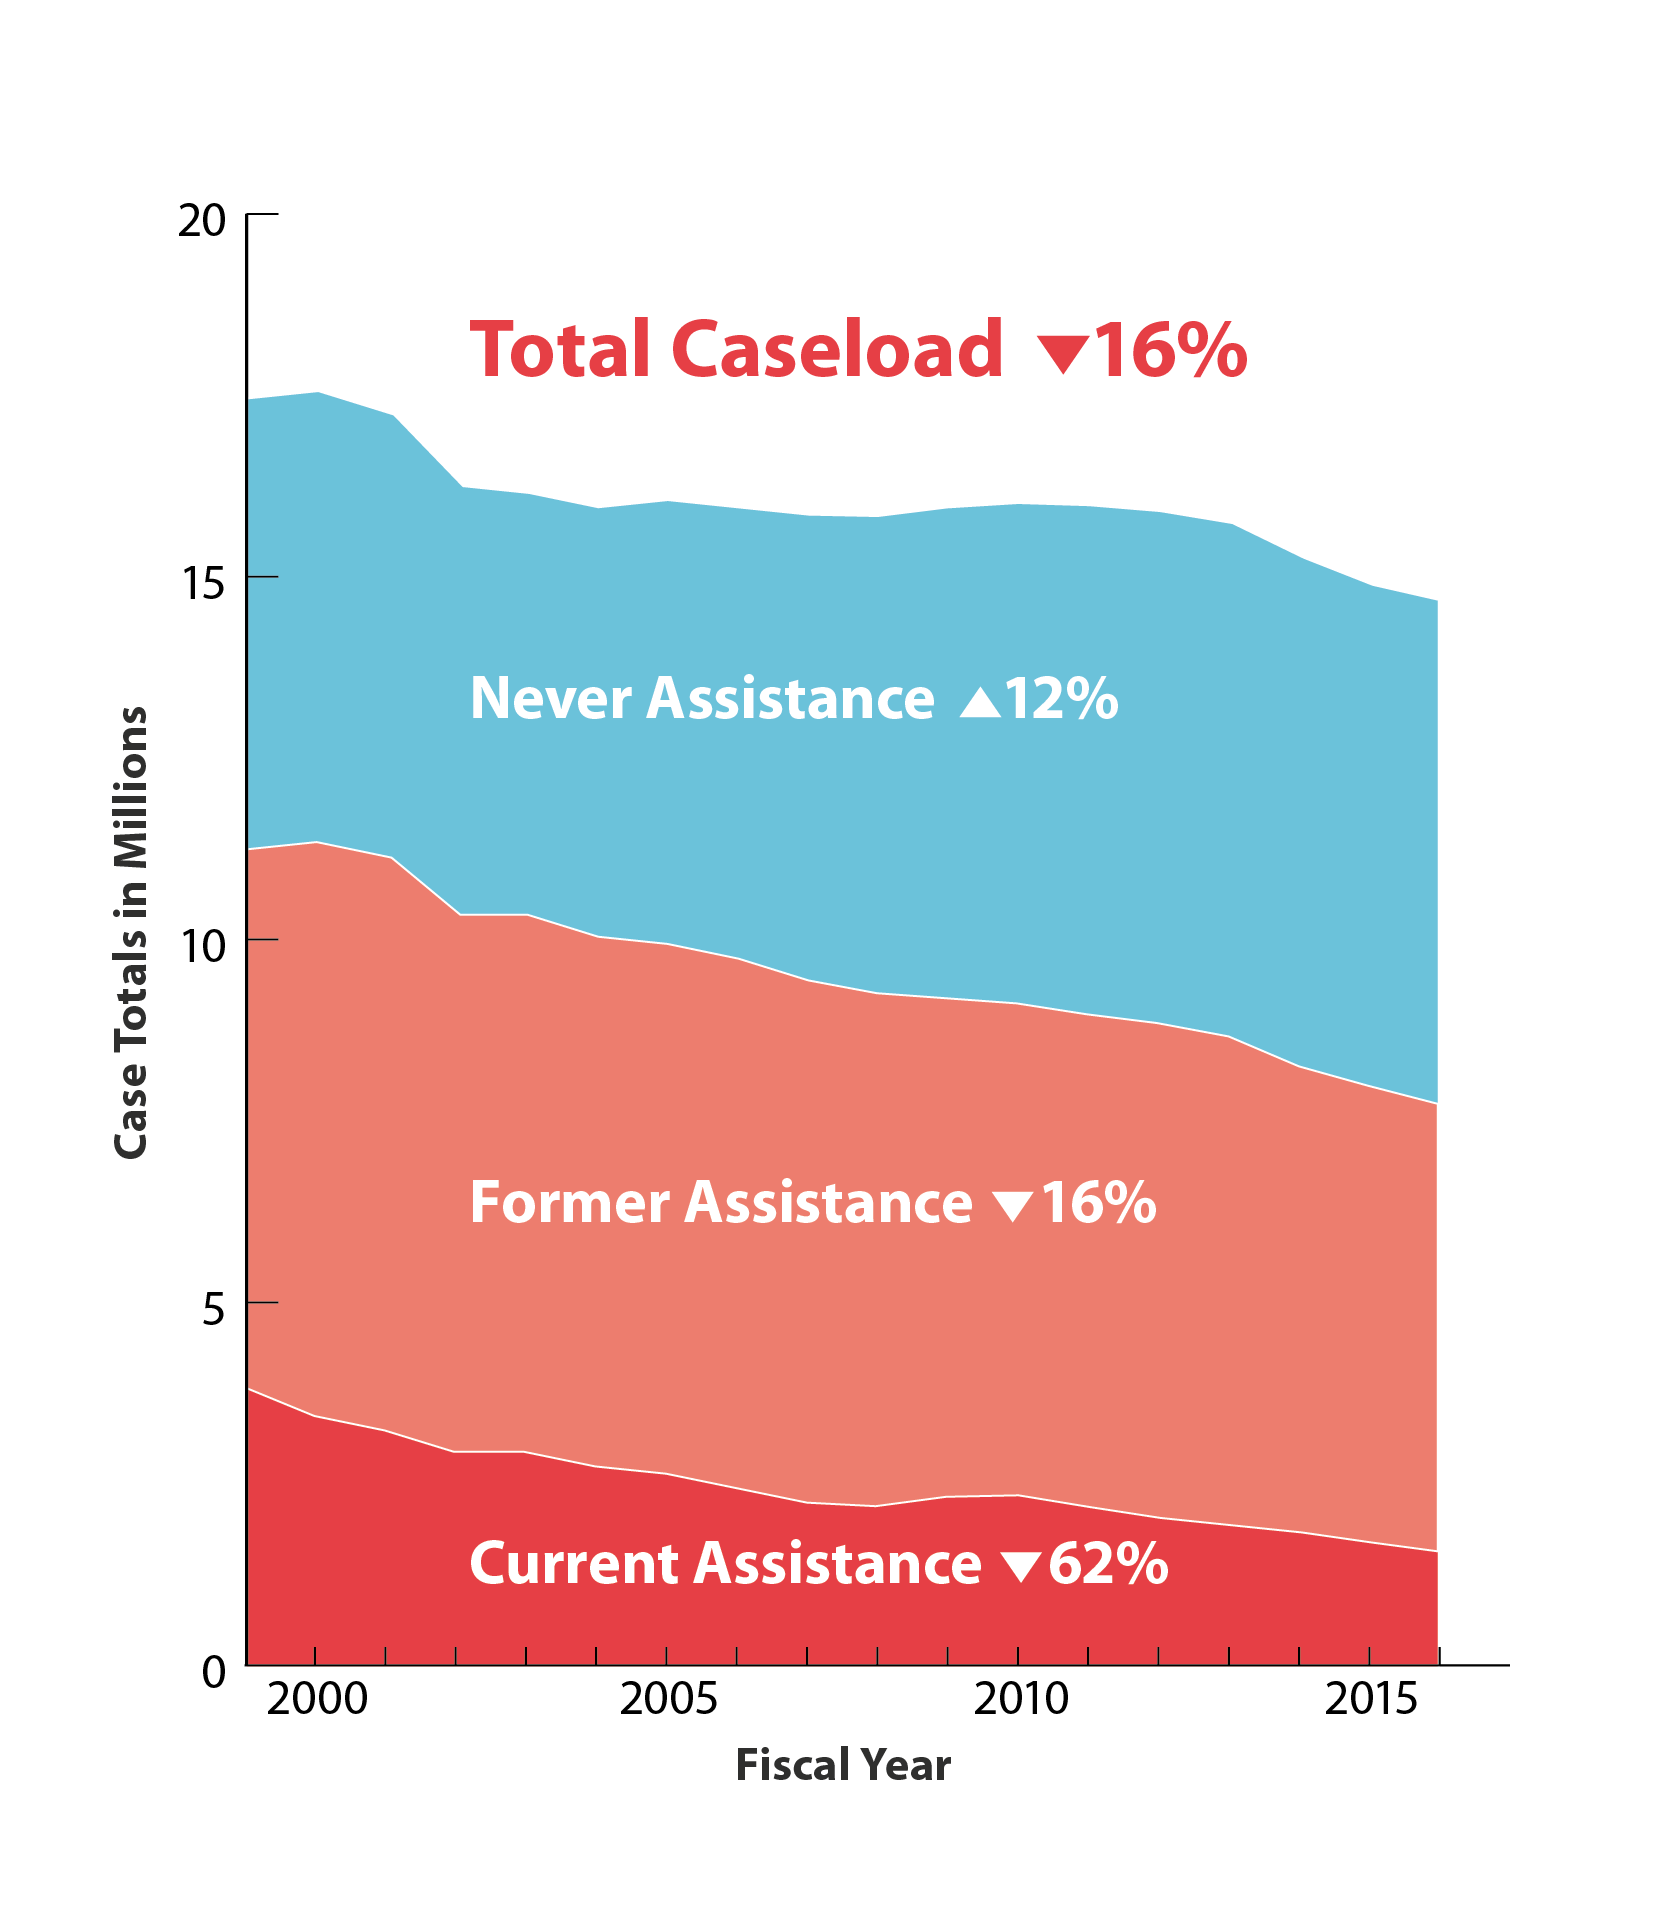 Graph showcasing data as a stacked line graph. The vertical axis displays case totals in millions, from 0 to 20, and the horizontal axis displays the fiscal year, from 1999 to 2016. Total Caseload down 16%, Never Assistance up 12%, Former Assistance down 16%, Current Assistance down 62%.